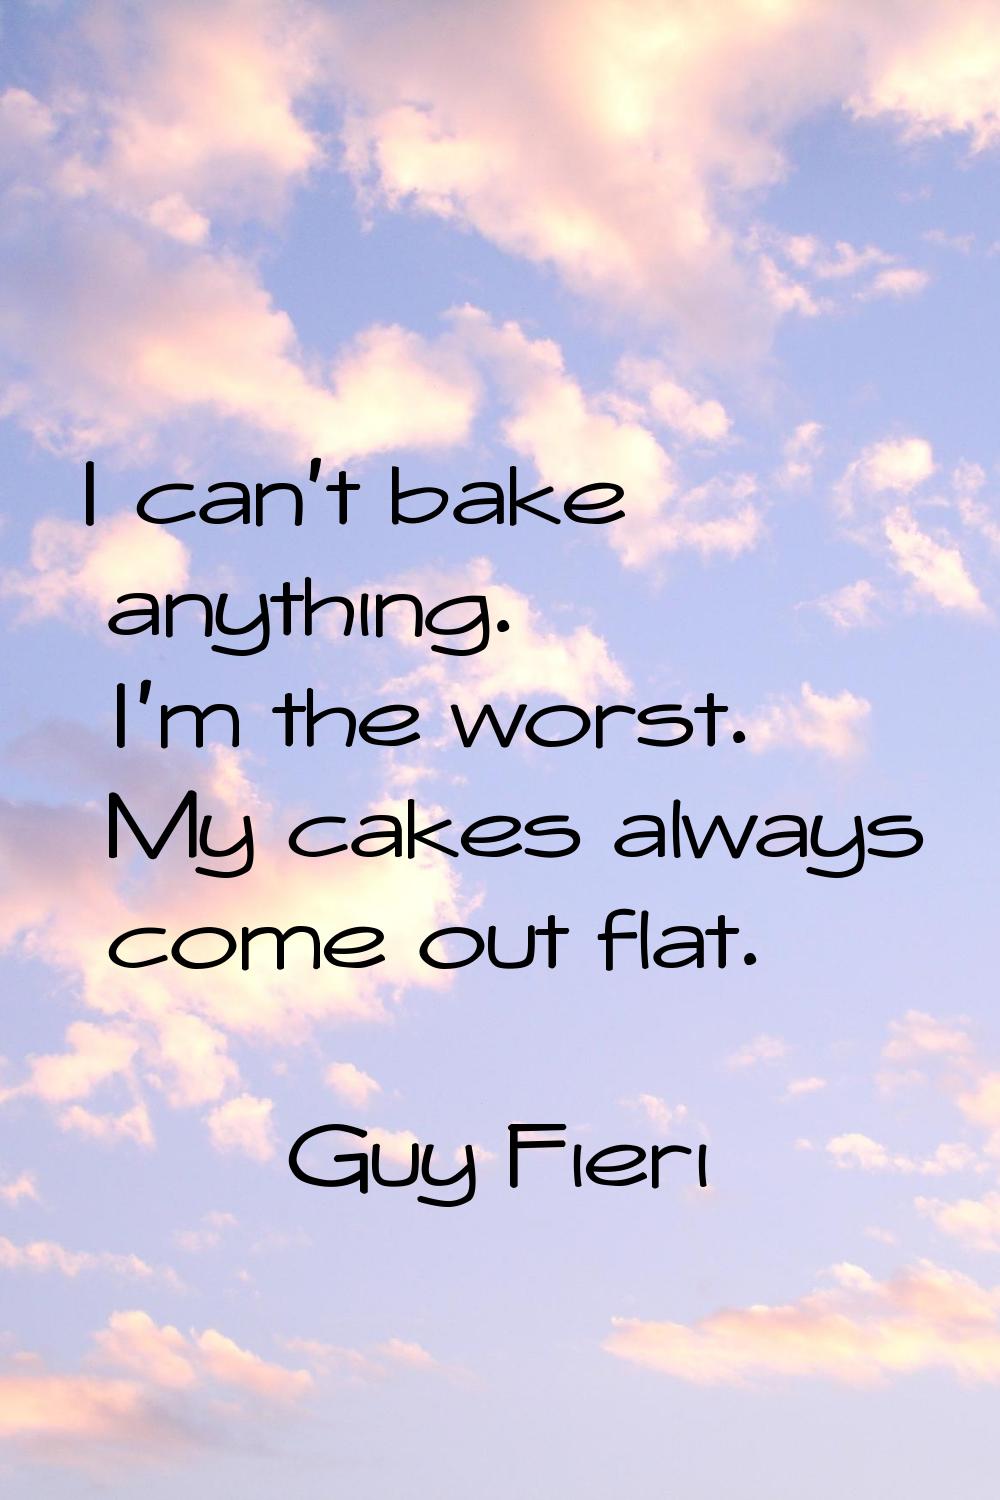 I can't bake anything. I'm the worst. My cakes always come out flat.